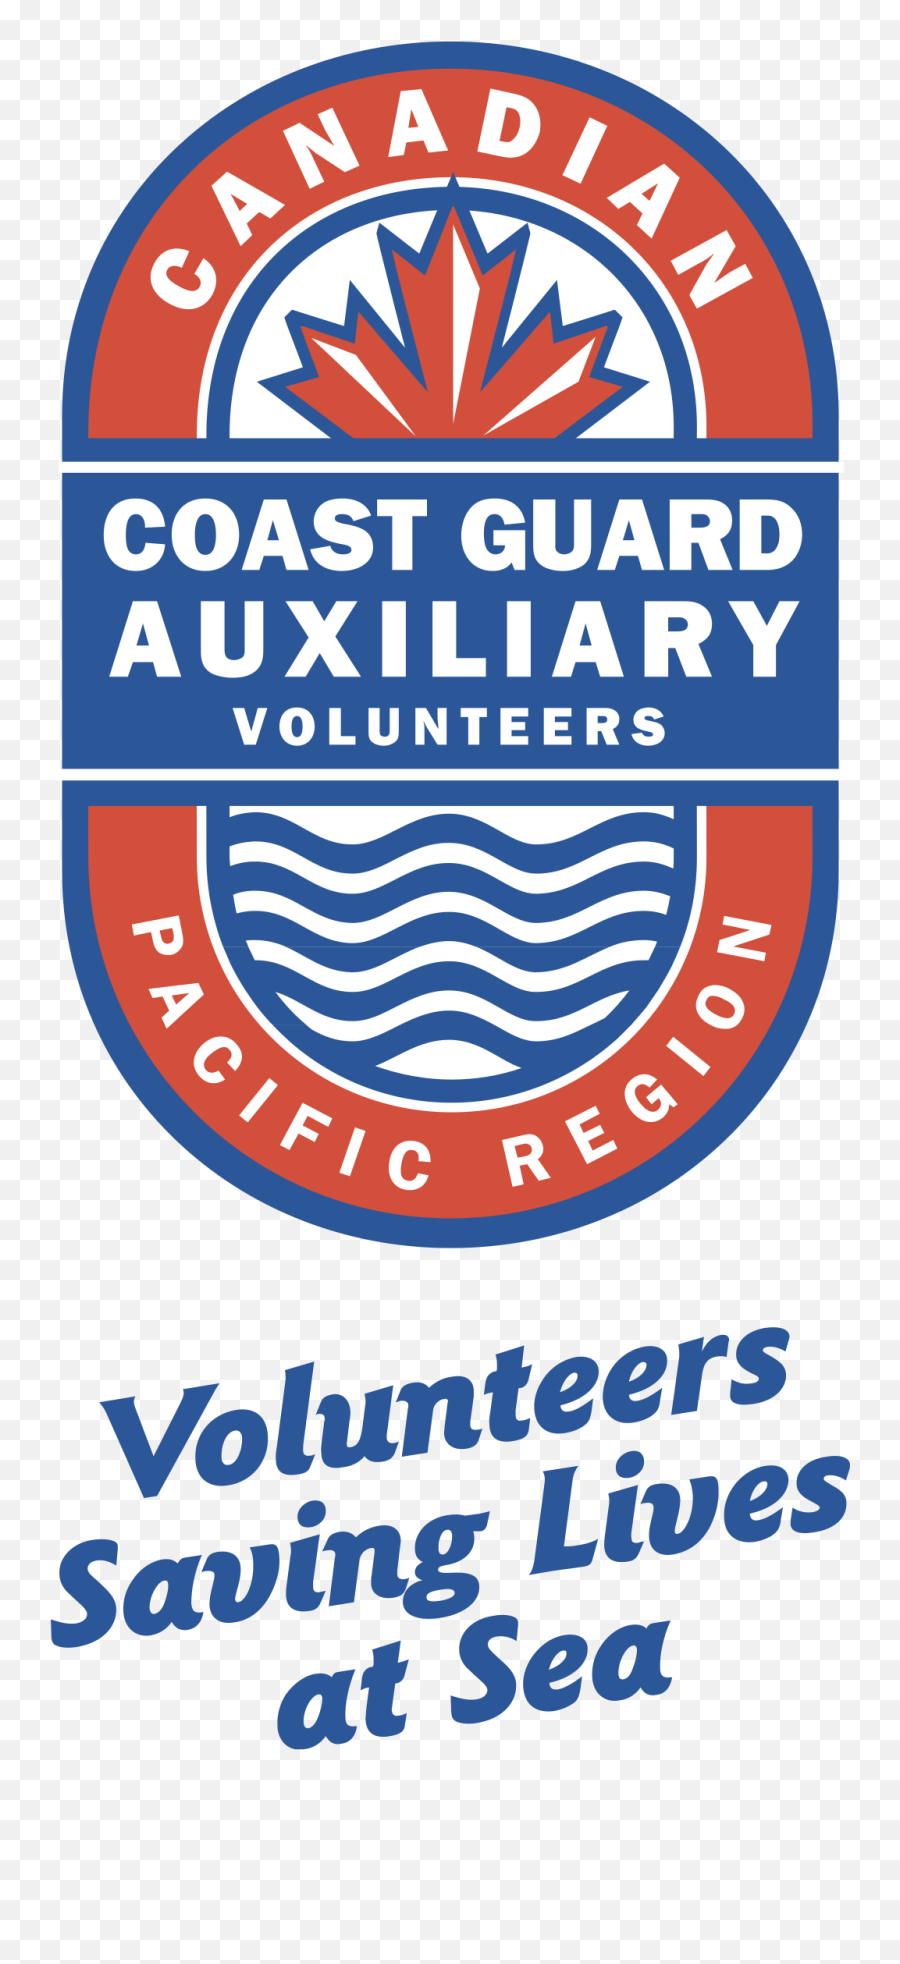 Canadian Coast Guard Auxiliary Logo Png Transparent U0026 Svg - Canadian Coast Guard Auxiliary,Coast Guard Logo Png